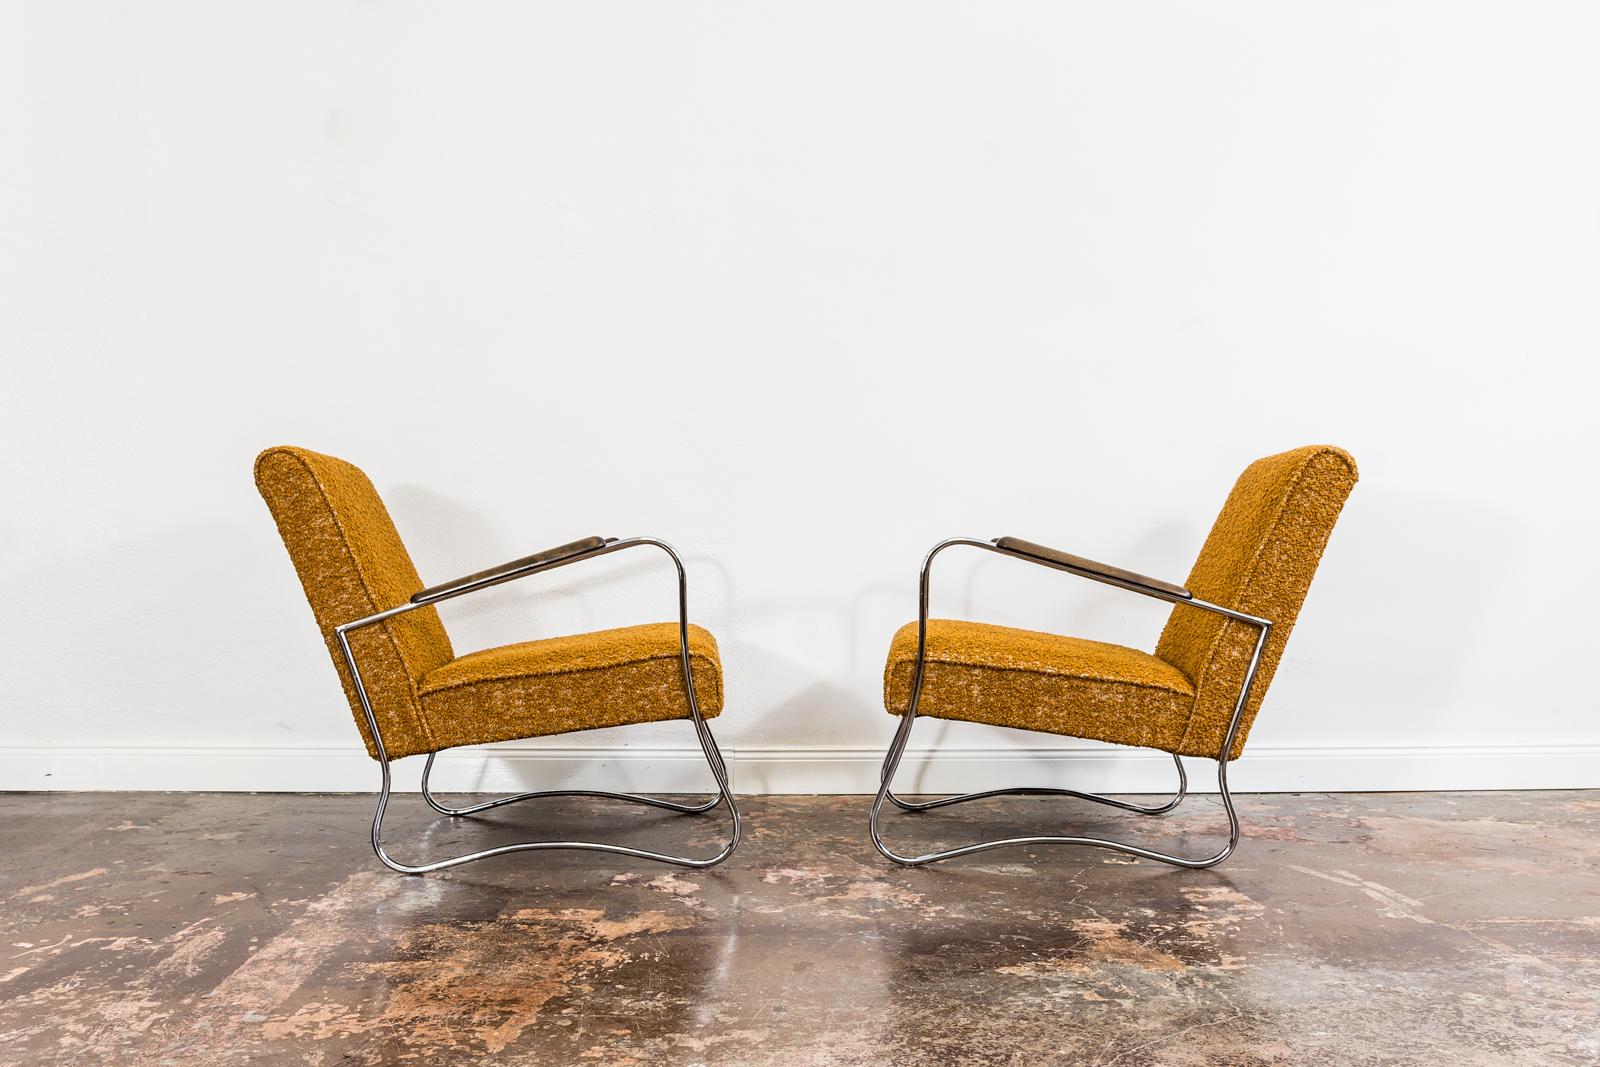 Pair of Armchairs from Fabryka Mebli Wschód in Zadziele, Poland, 1950s,
Metal frames has been rechrome, wood armrests have refinished.
Reupholstered in orange boucle type of fabric.
We offer fabric customization upon request.